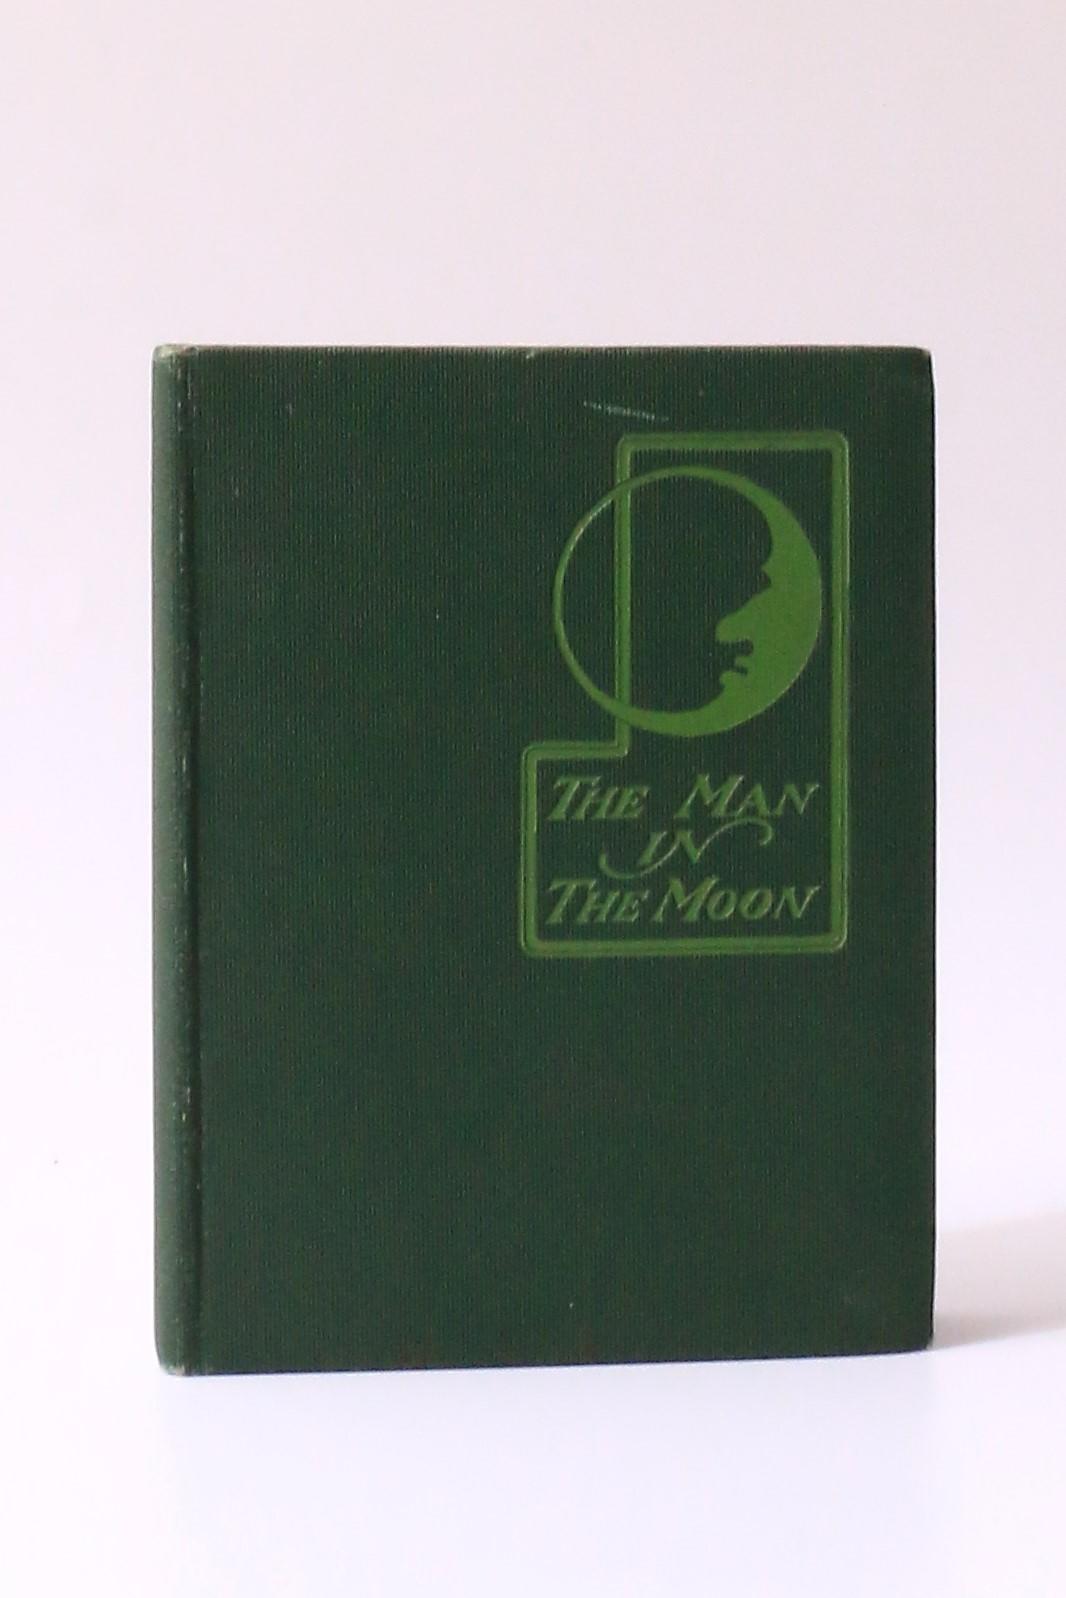 Bertram Dendron - The Man in the Moon, or, The Unexpected - Bonnell, Silver & Co., 1901, First Edition.